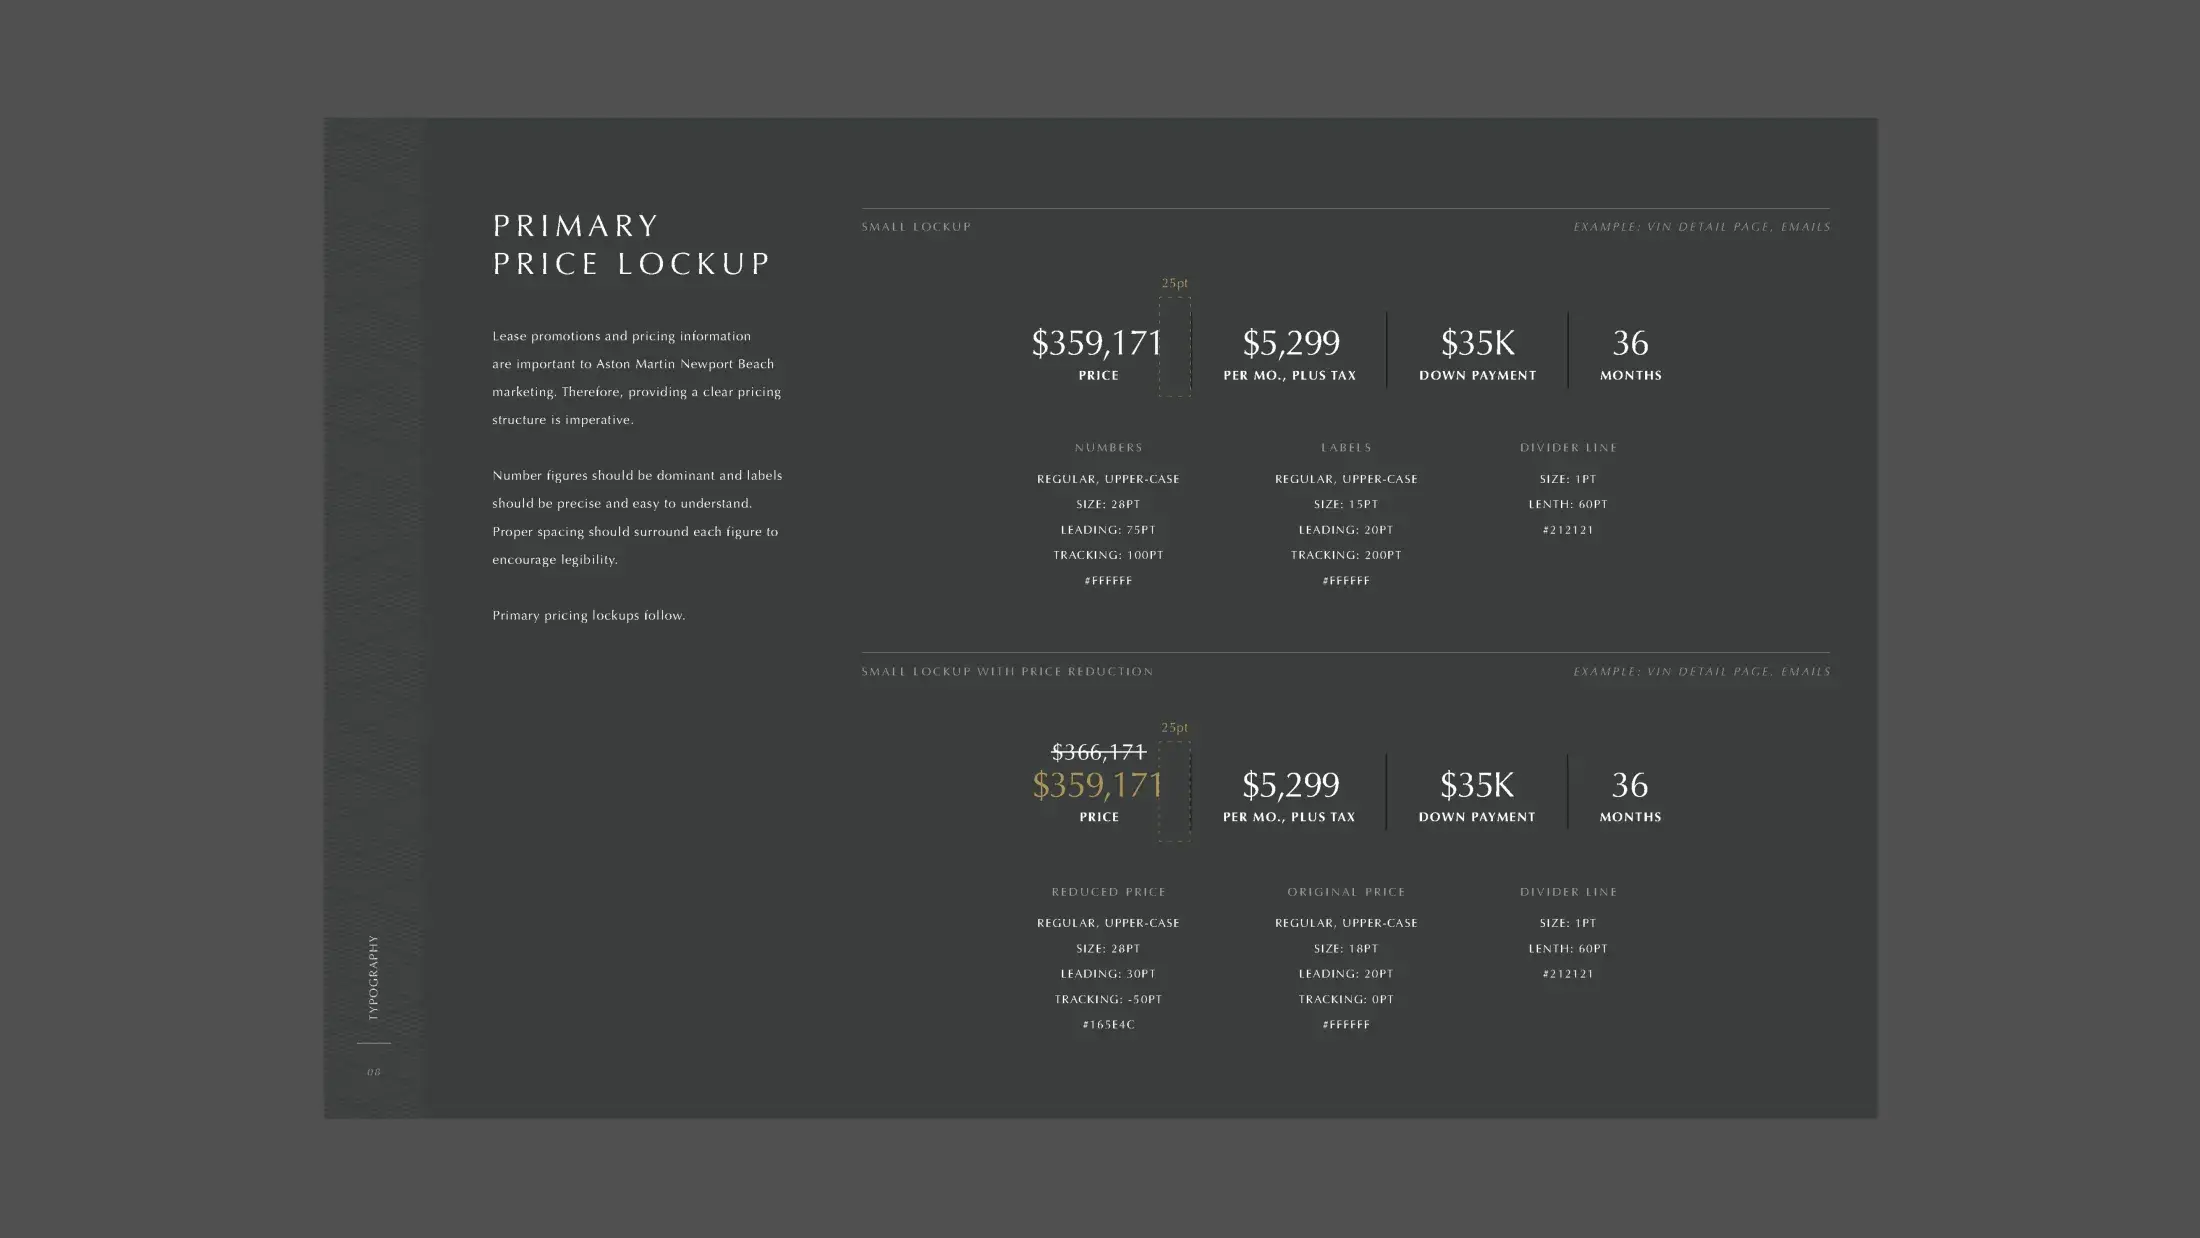 Style guide page on typography, primary price lockup